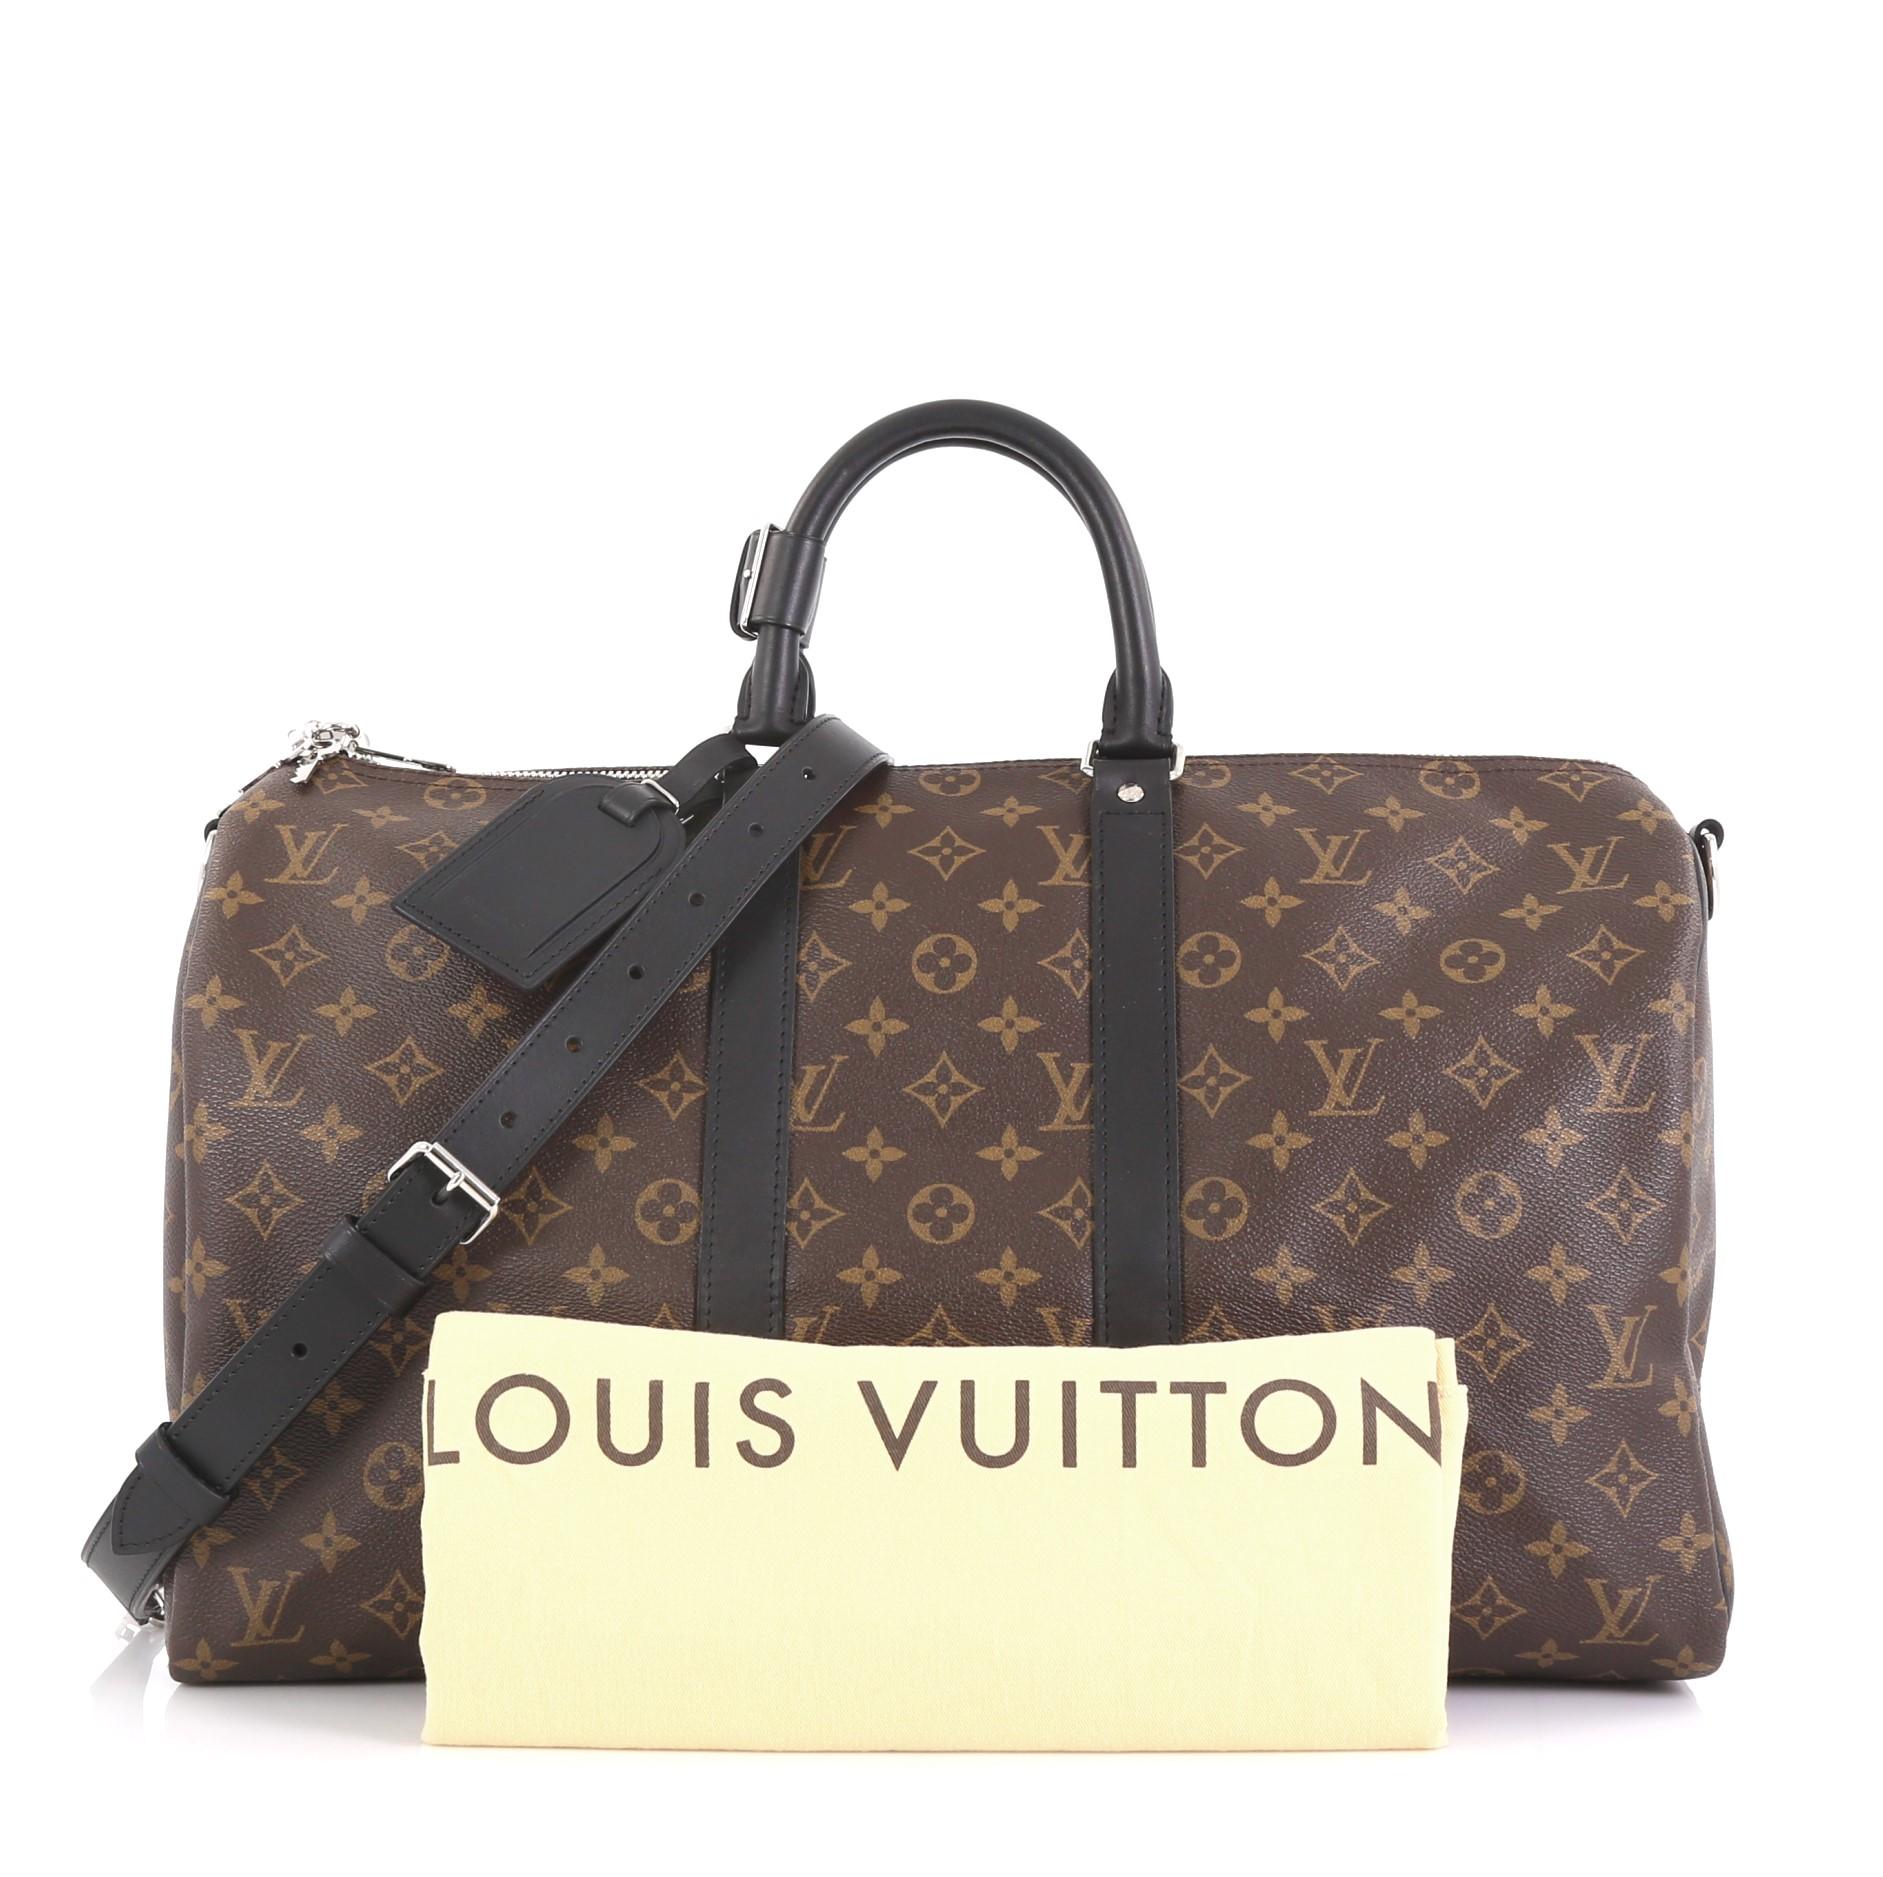 This Louis Vuitton Keepall Bandouliere Bag Macassar Monogram Canvas 45, crafted in brown macassar monogram coated canvas, features dual rolled leather handles, black leather trim, and silver-tone hardware. Its two-way zip closure opens to a burgundy